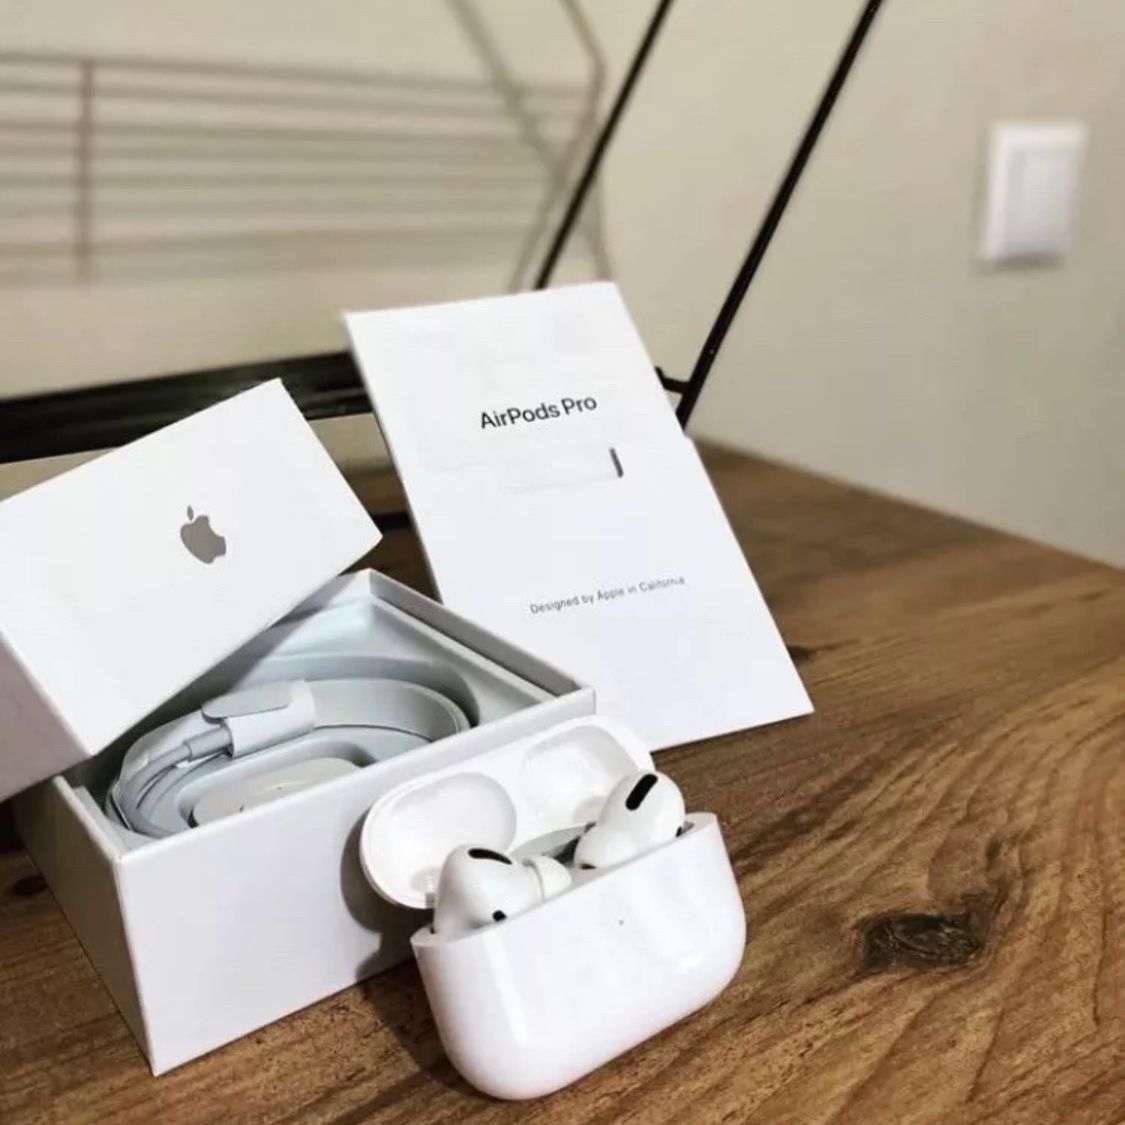 Apple Airpods Pro 2nd Generation with Magsafe Wireless charging case (USB-C)